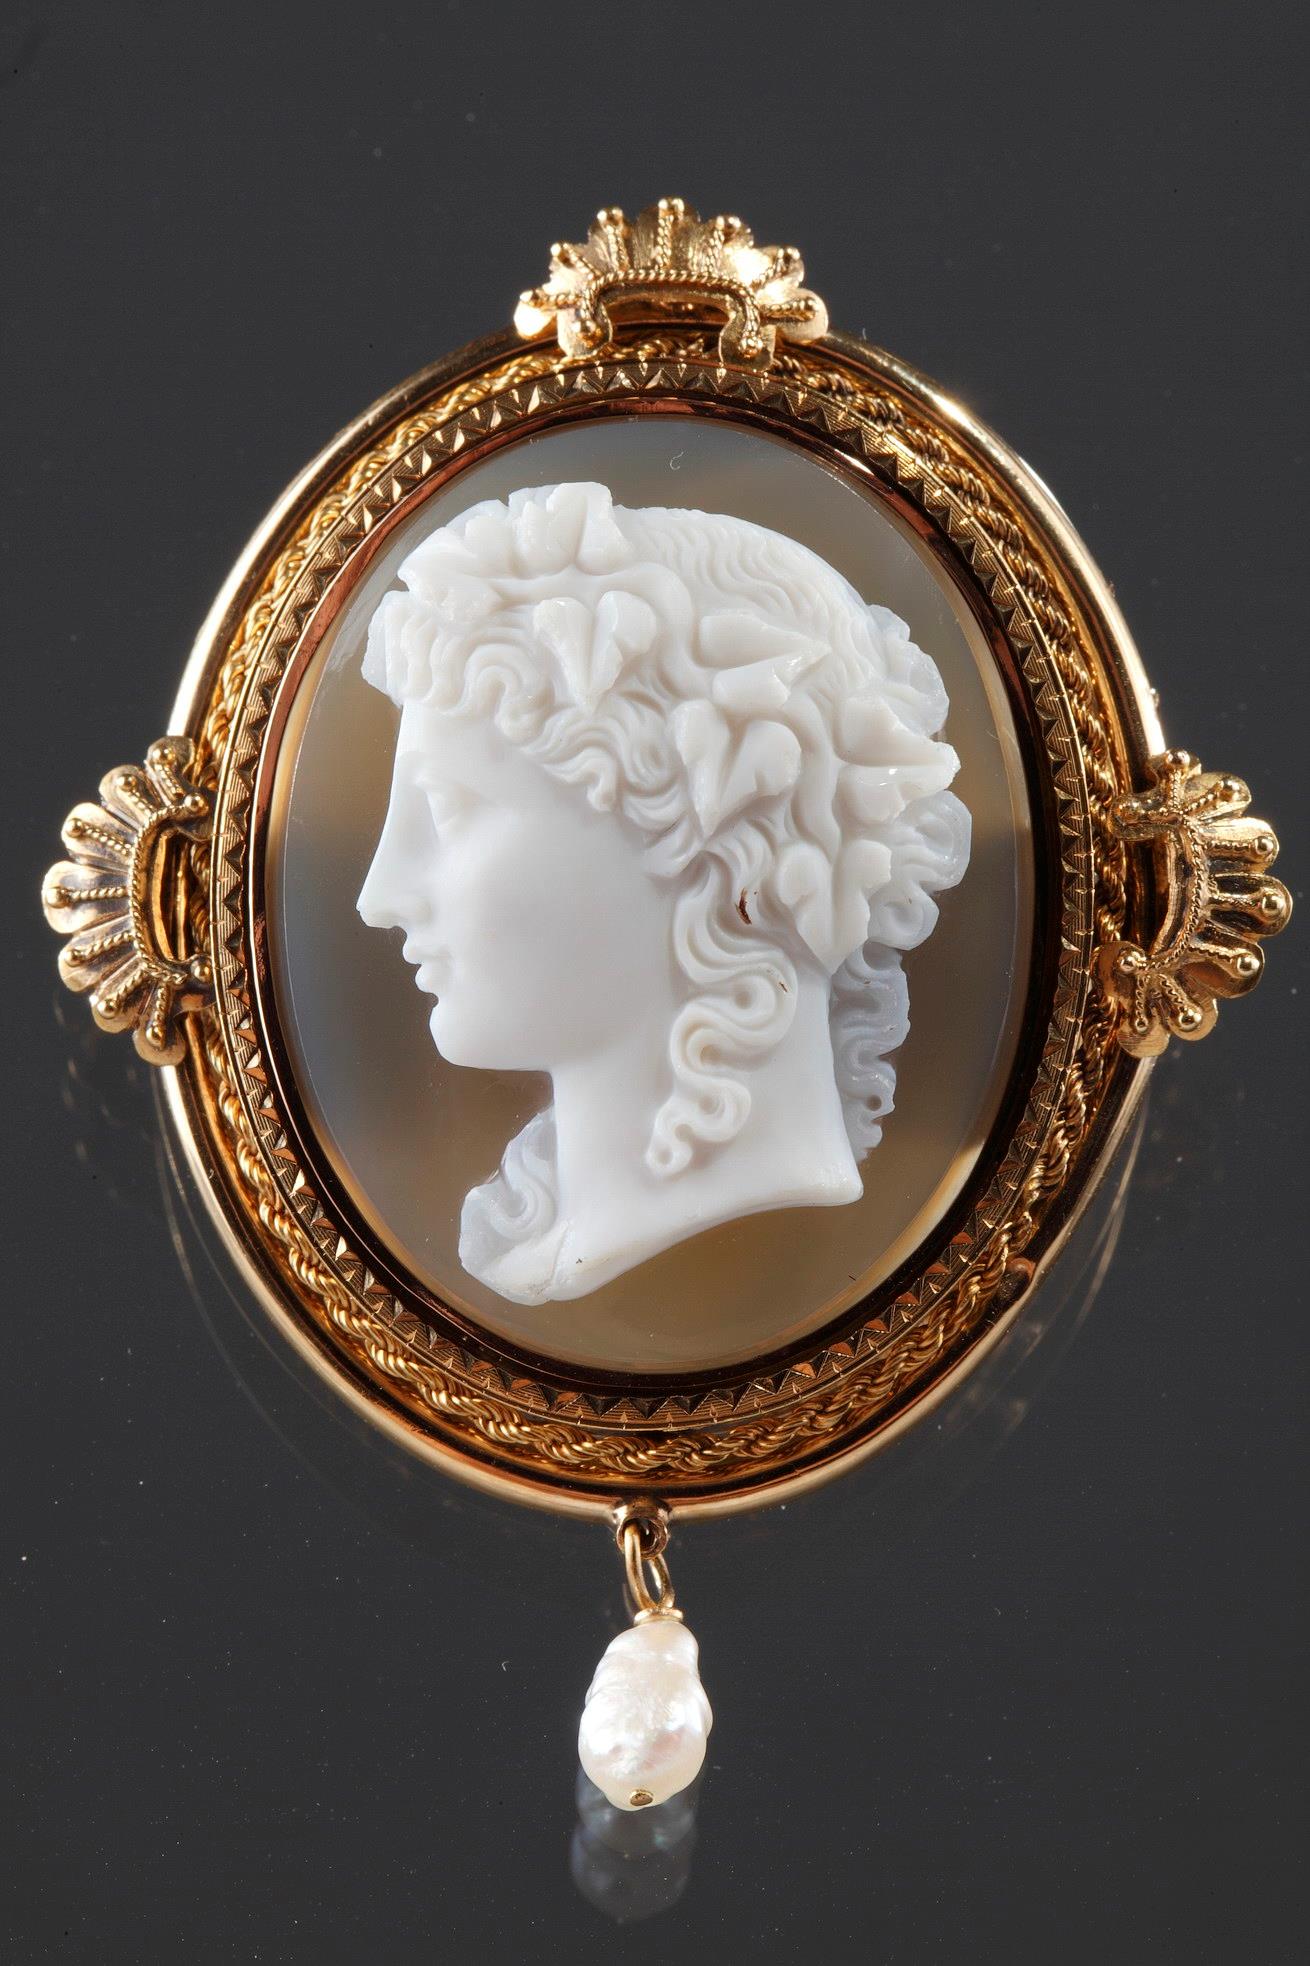 Gold Brooch with Pearl and Cameo on Agate